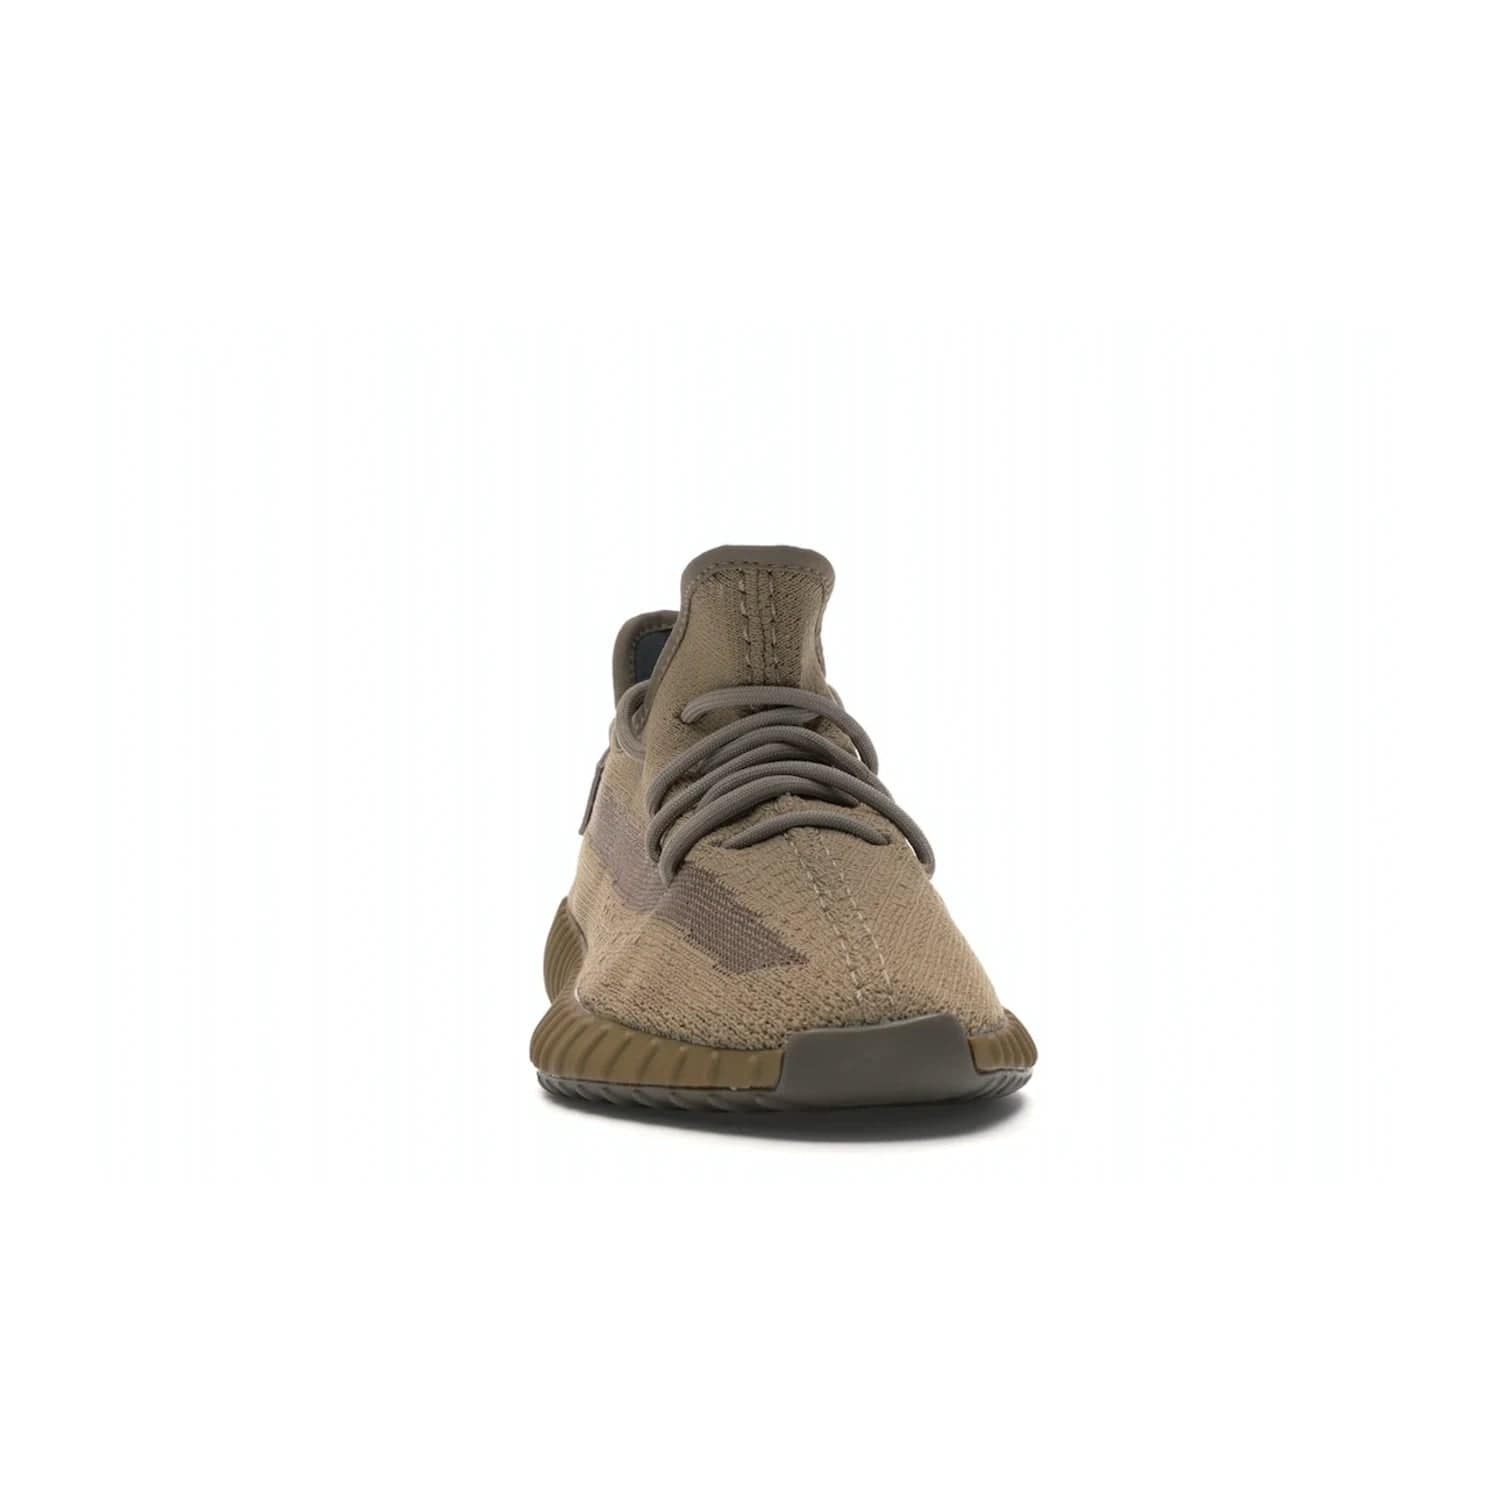 adidas Yeezy Boost 350 V2 Earth - Image 9 - Only at www.BallersClubKickz.com - Abstract style with the adidas Yeezy Boost 350 V2 Earth. Crafted with mud Primeknit upper, mud Boost and interior, and a translucent side stripe. Regional exclusive in Earth/Earth/Earth colorway, these fashionable sneakers released in February 2020. Showcase your style with the Yeezy 350 V2 Earth.